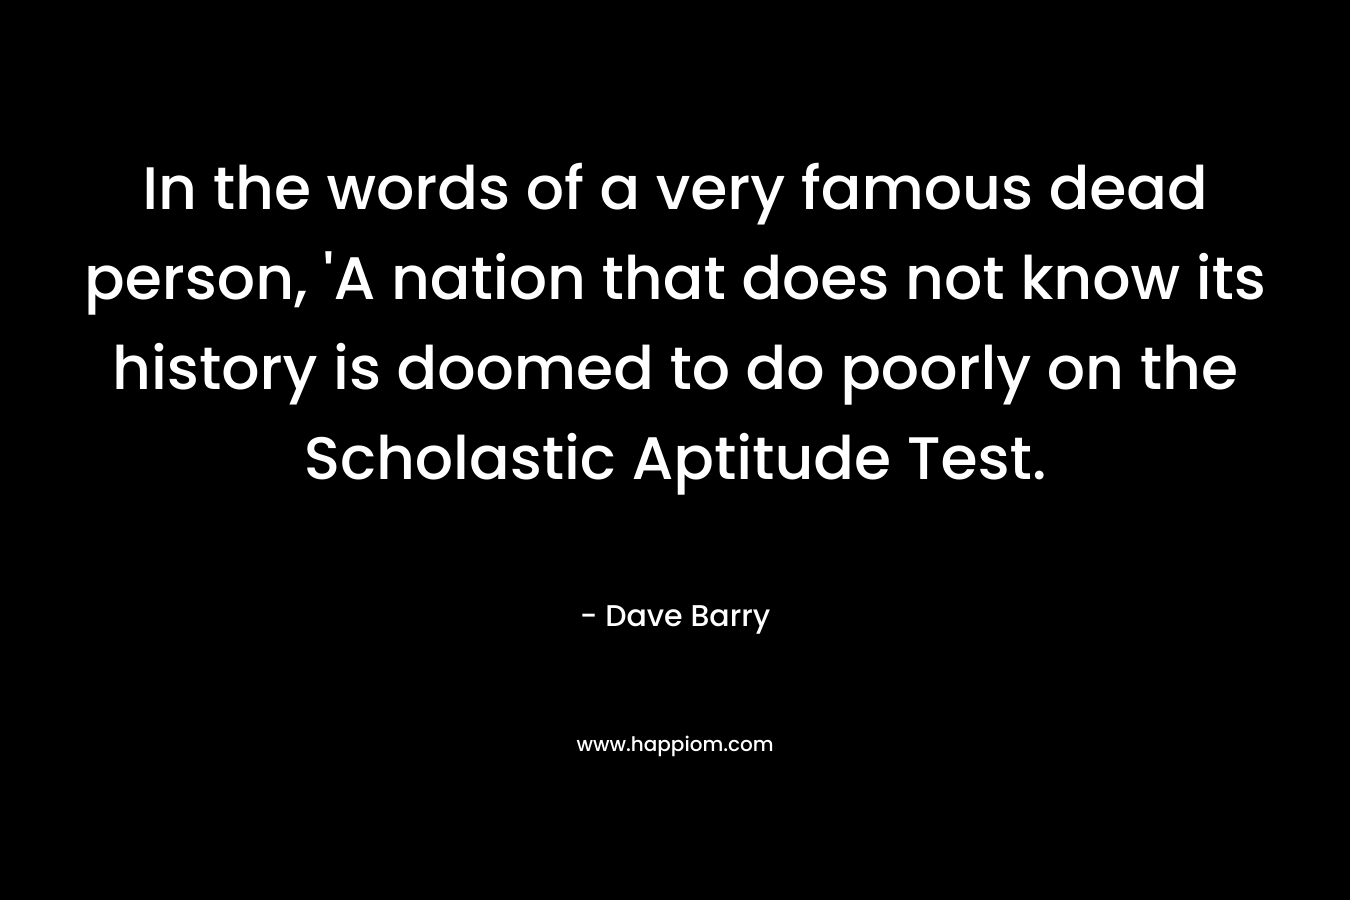 In the words of a very famous dead person, 'A nation that does not know its history is doomed to do poorly on the Scholastic Aptitude Test.